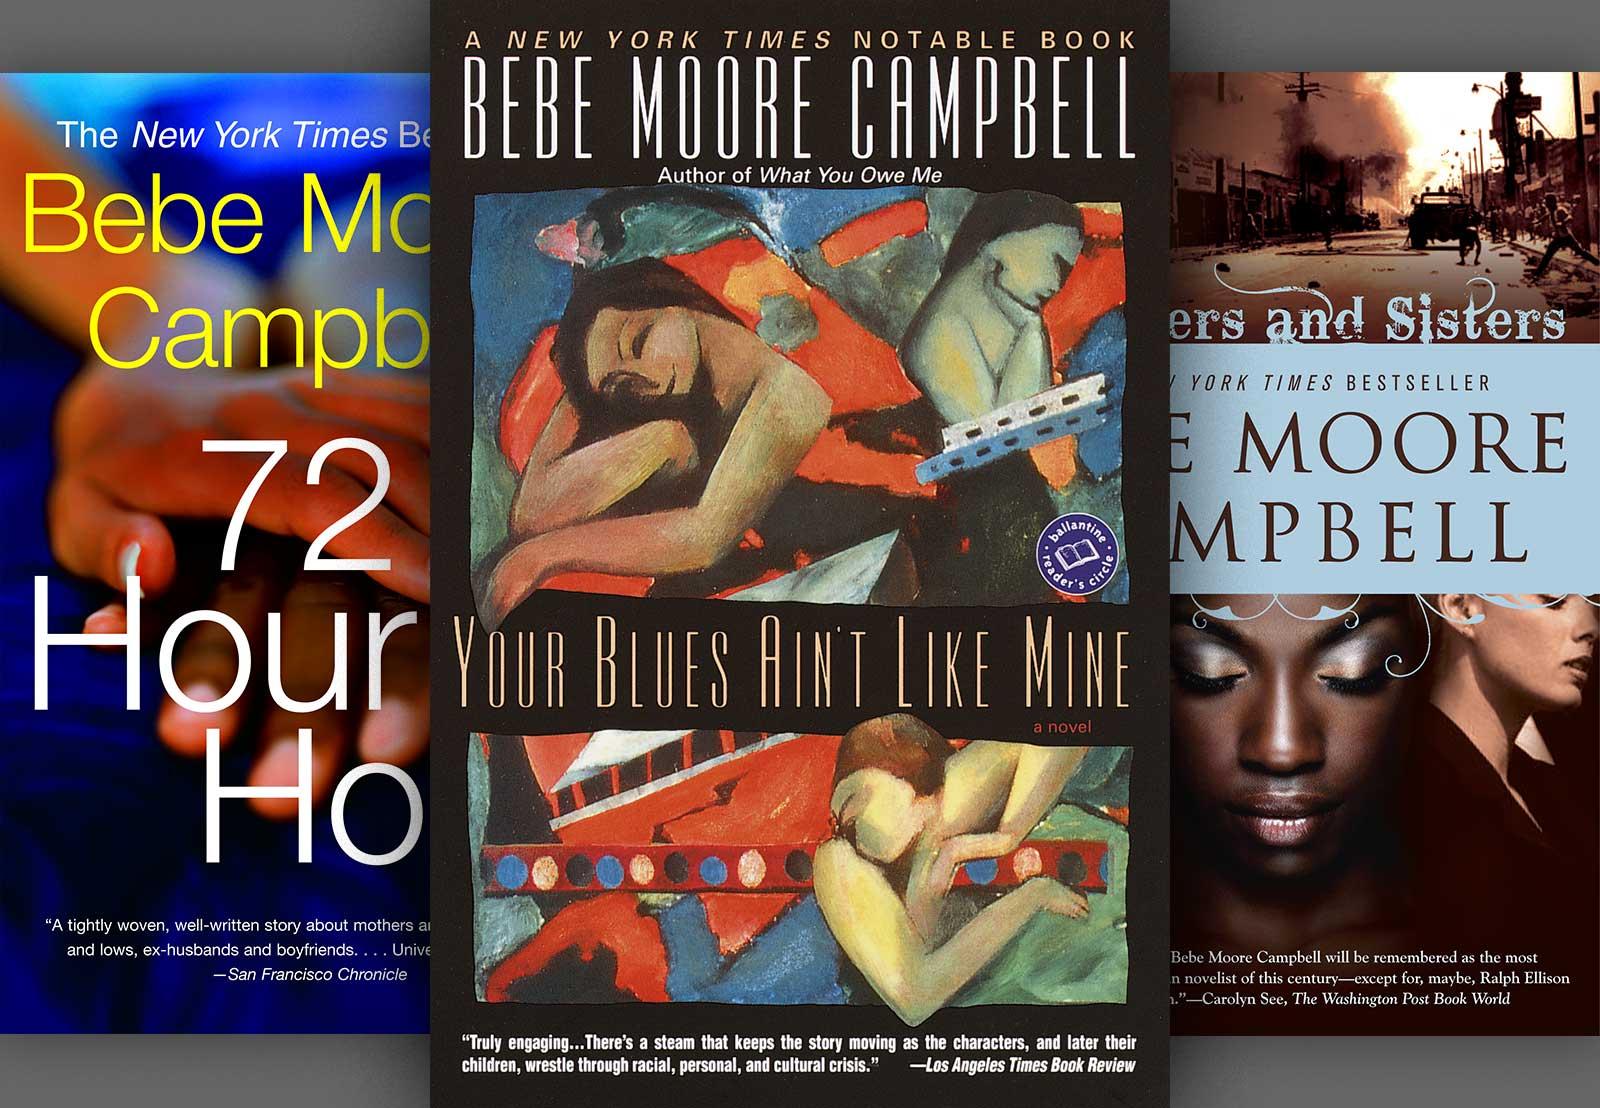 Books by Bebe Moore Campbell